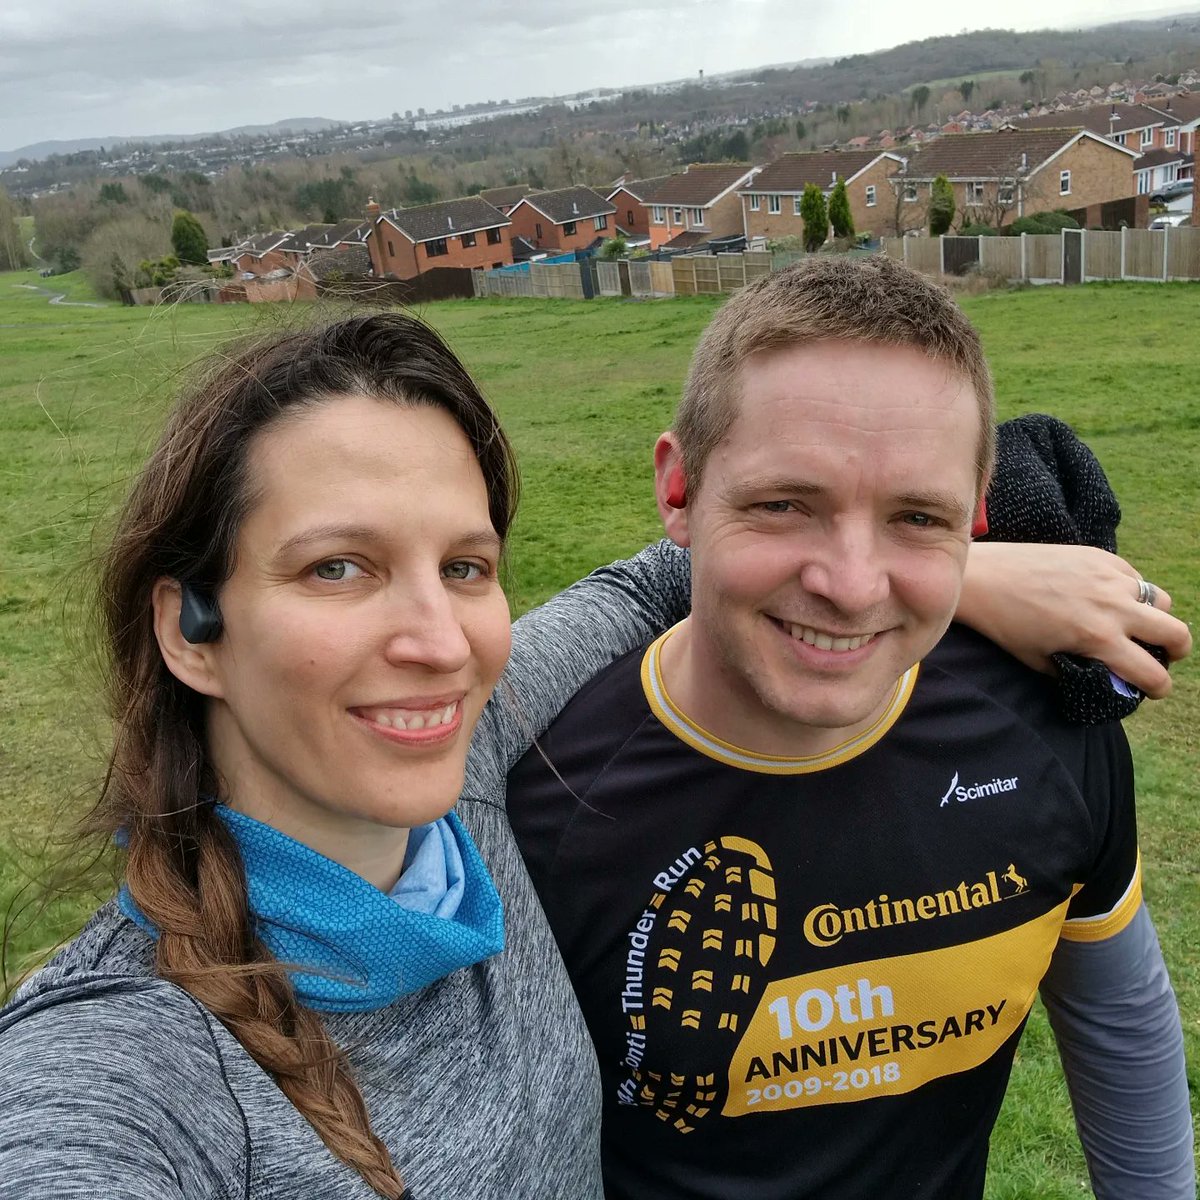 Blowing away the cobwebs with the hubster! An hours run as part of his marathon training after he finished his night shift for @WMFSFallingsP Back to @BCLivingMuseum for me tomorrow so Wednesday is our next run day! #MondayMotivation